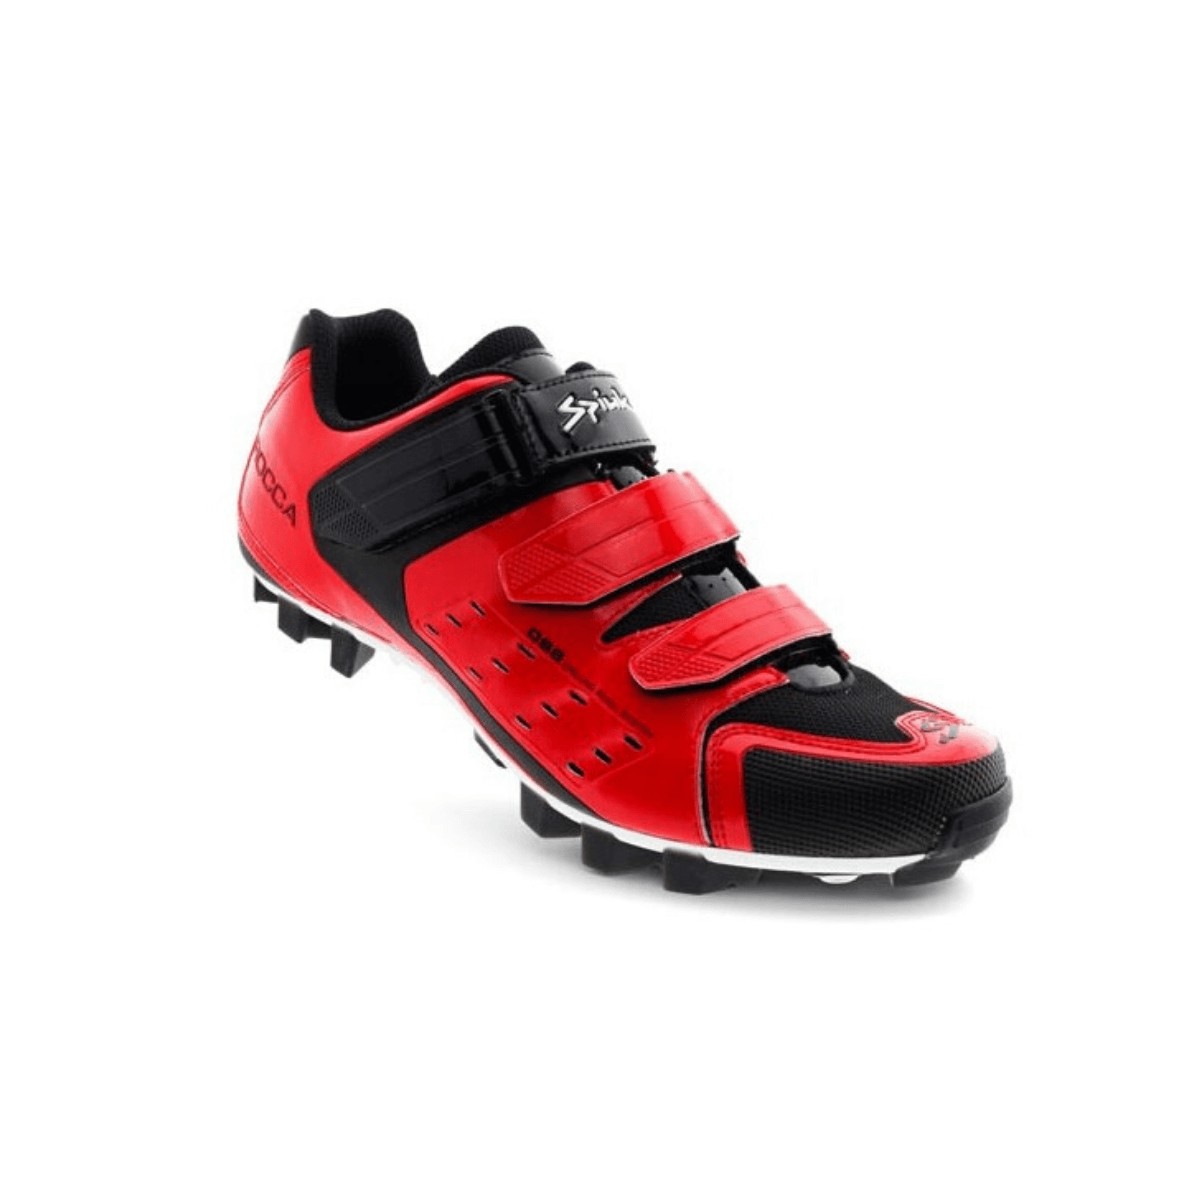 Spiuk Rocca MTB Red Shoes, Size 47